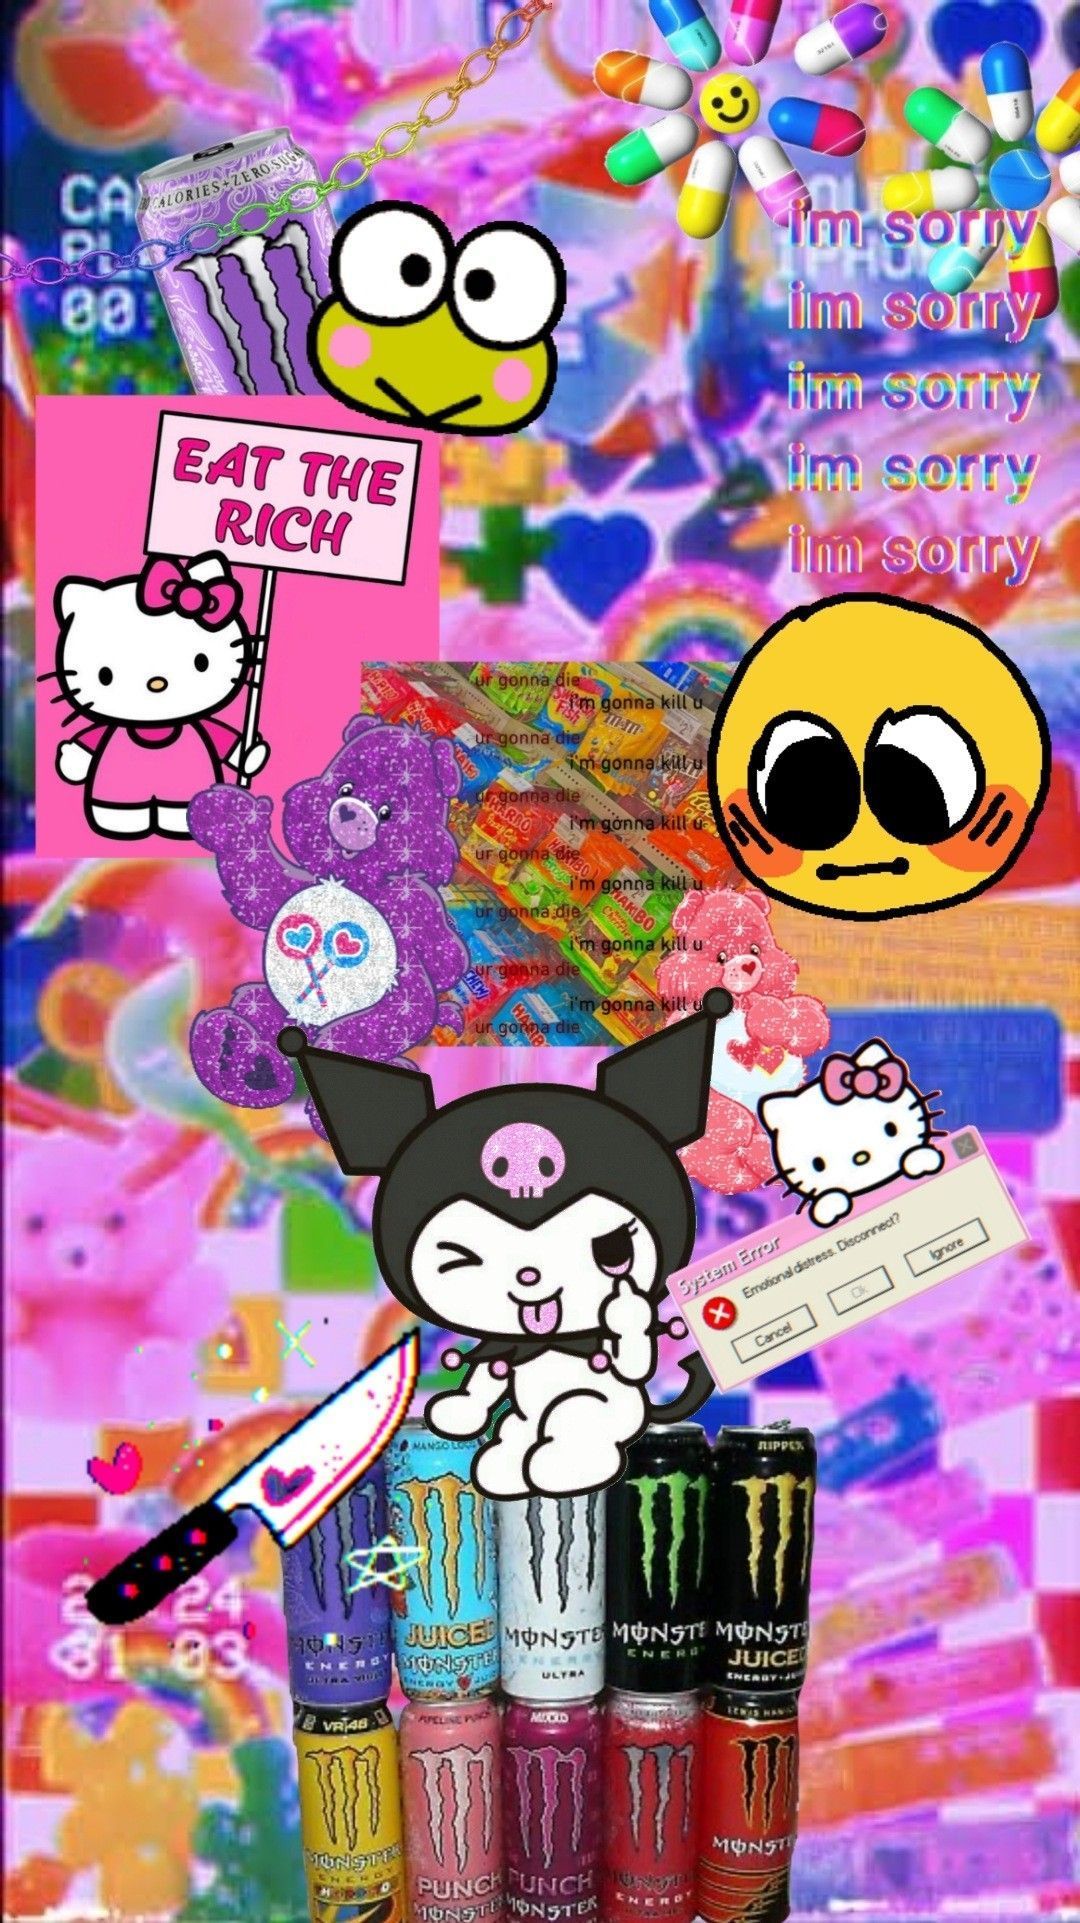 Aesthetic phone wallpaper with hello kitty, monster energy, and other things - Scenecore